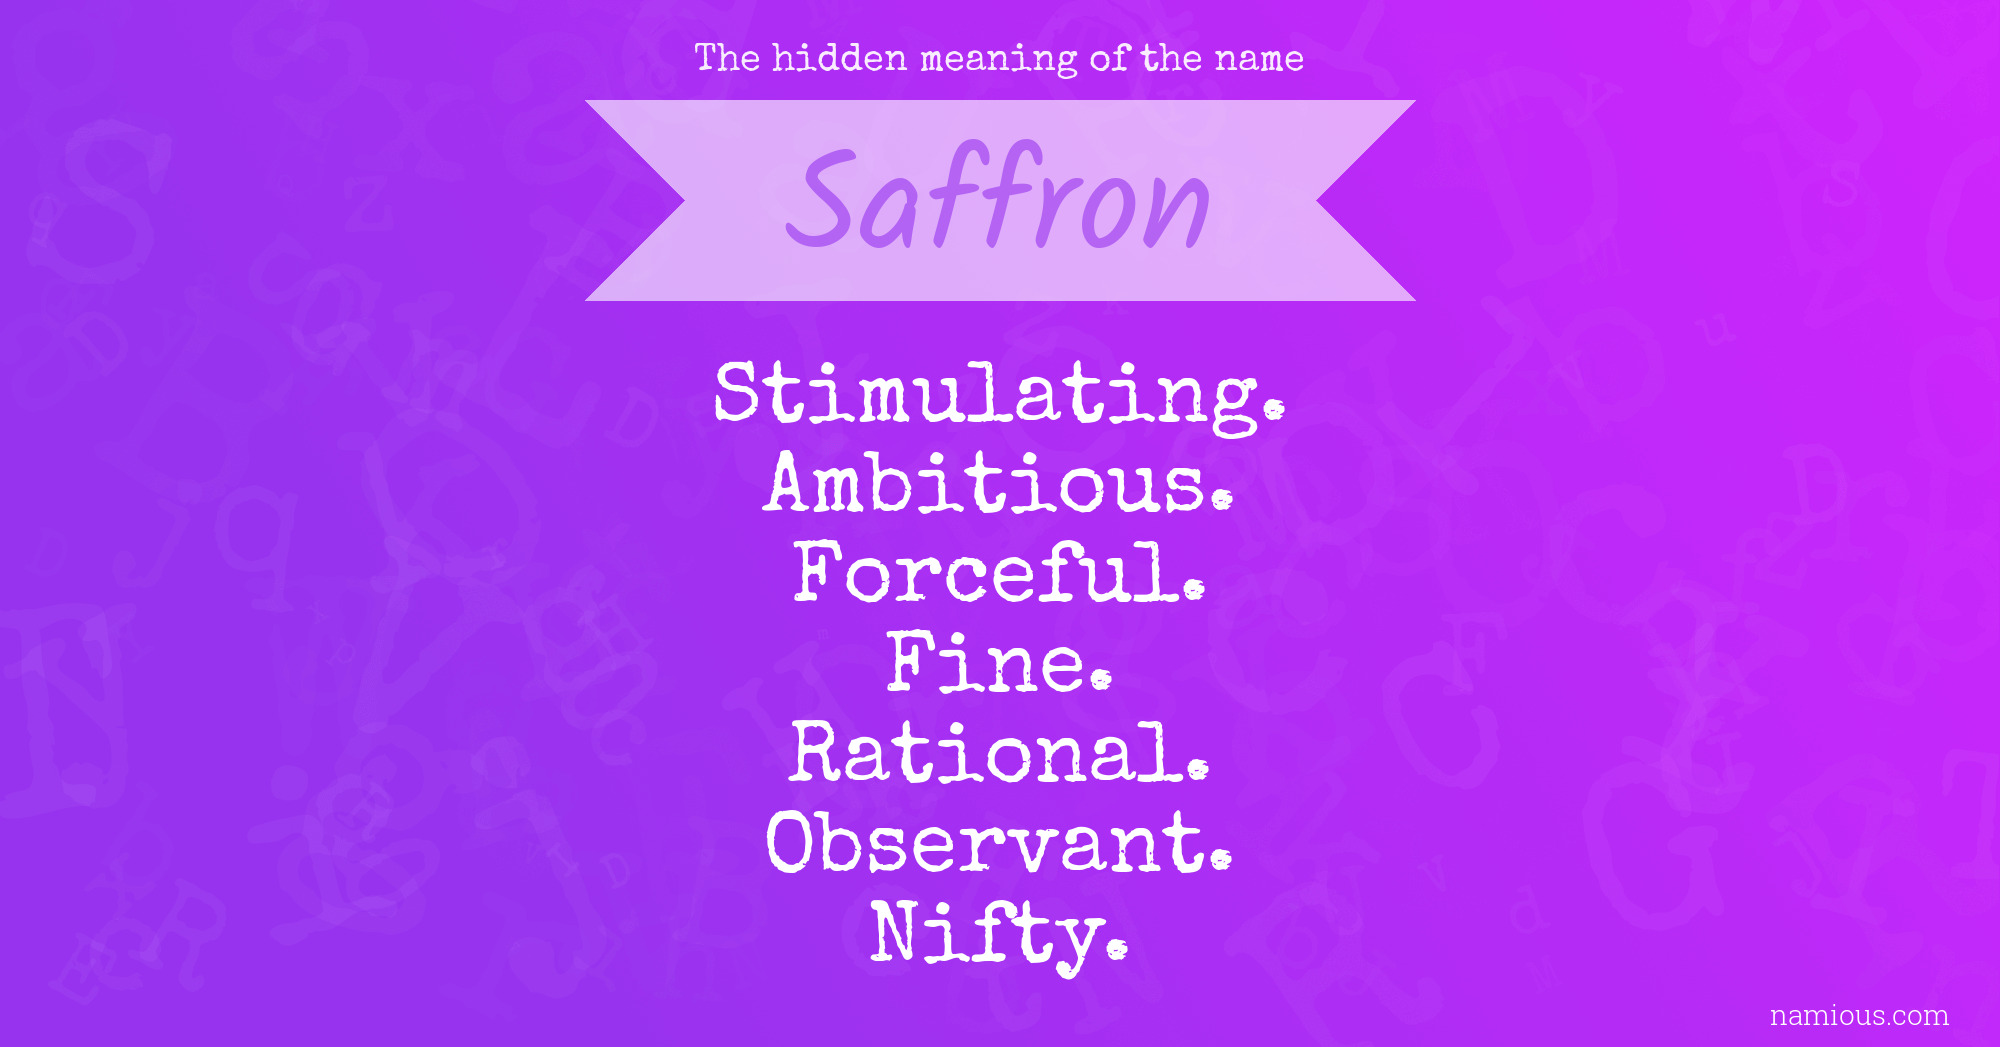 The hidden meaning of the name Saffron